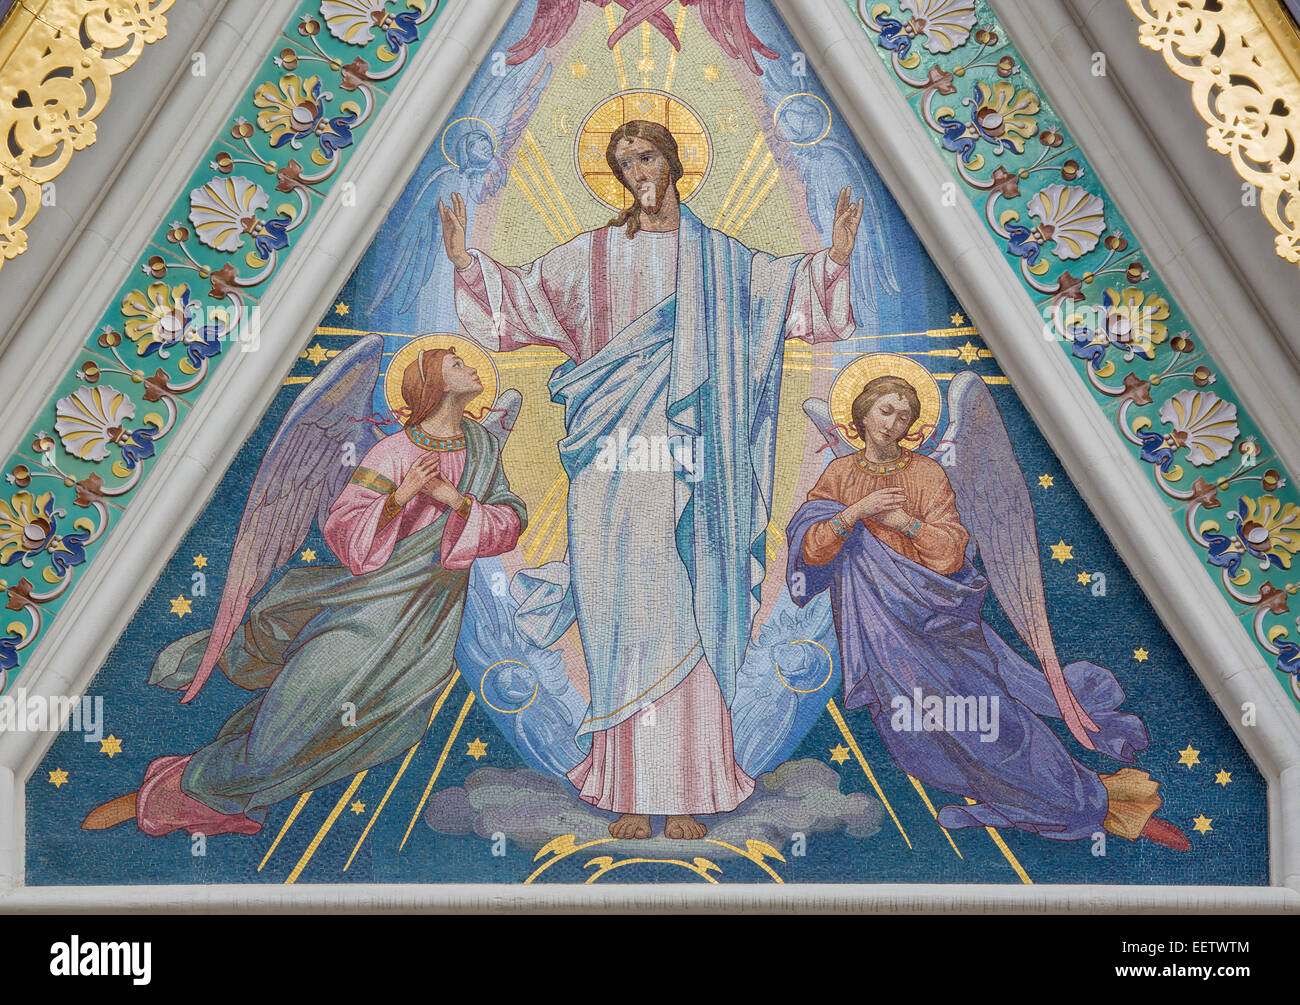 Vienna - The mosaic of Jesus Christ with the angels  on the Russian Orthodox cathedral of st. Nicholas. Stock Photo